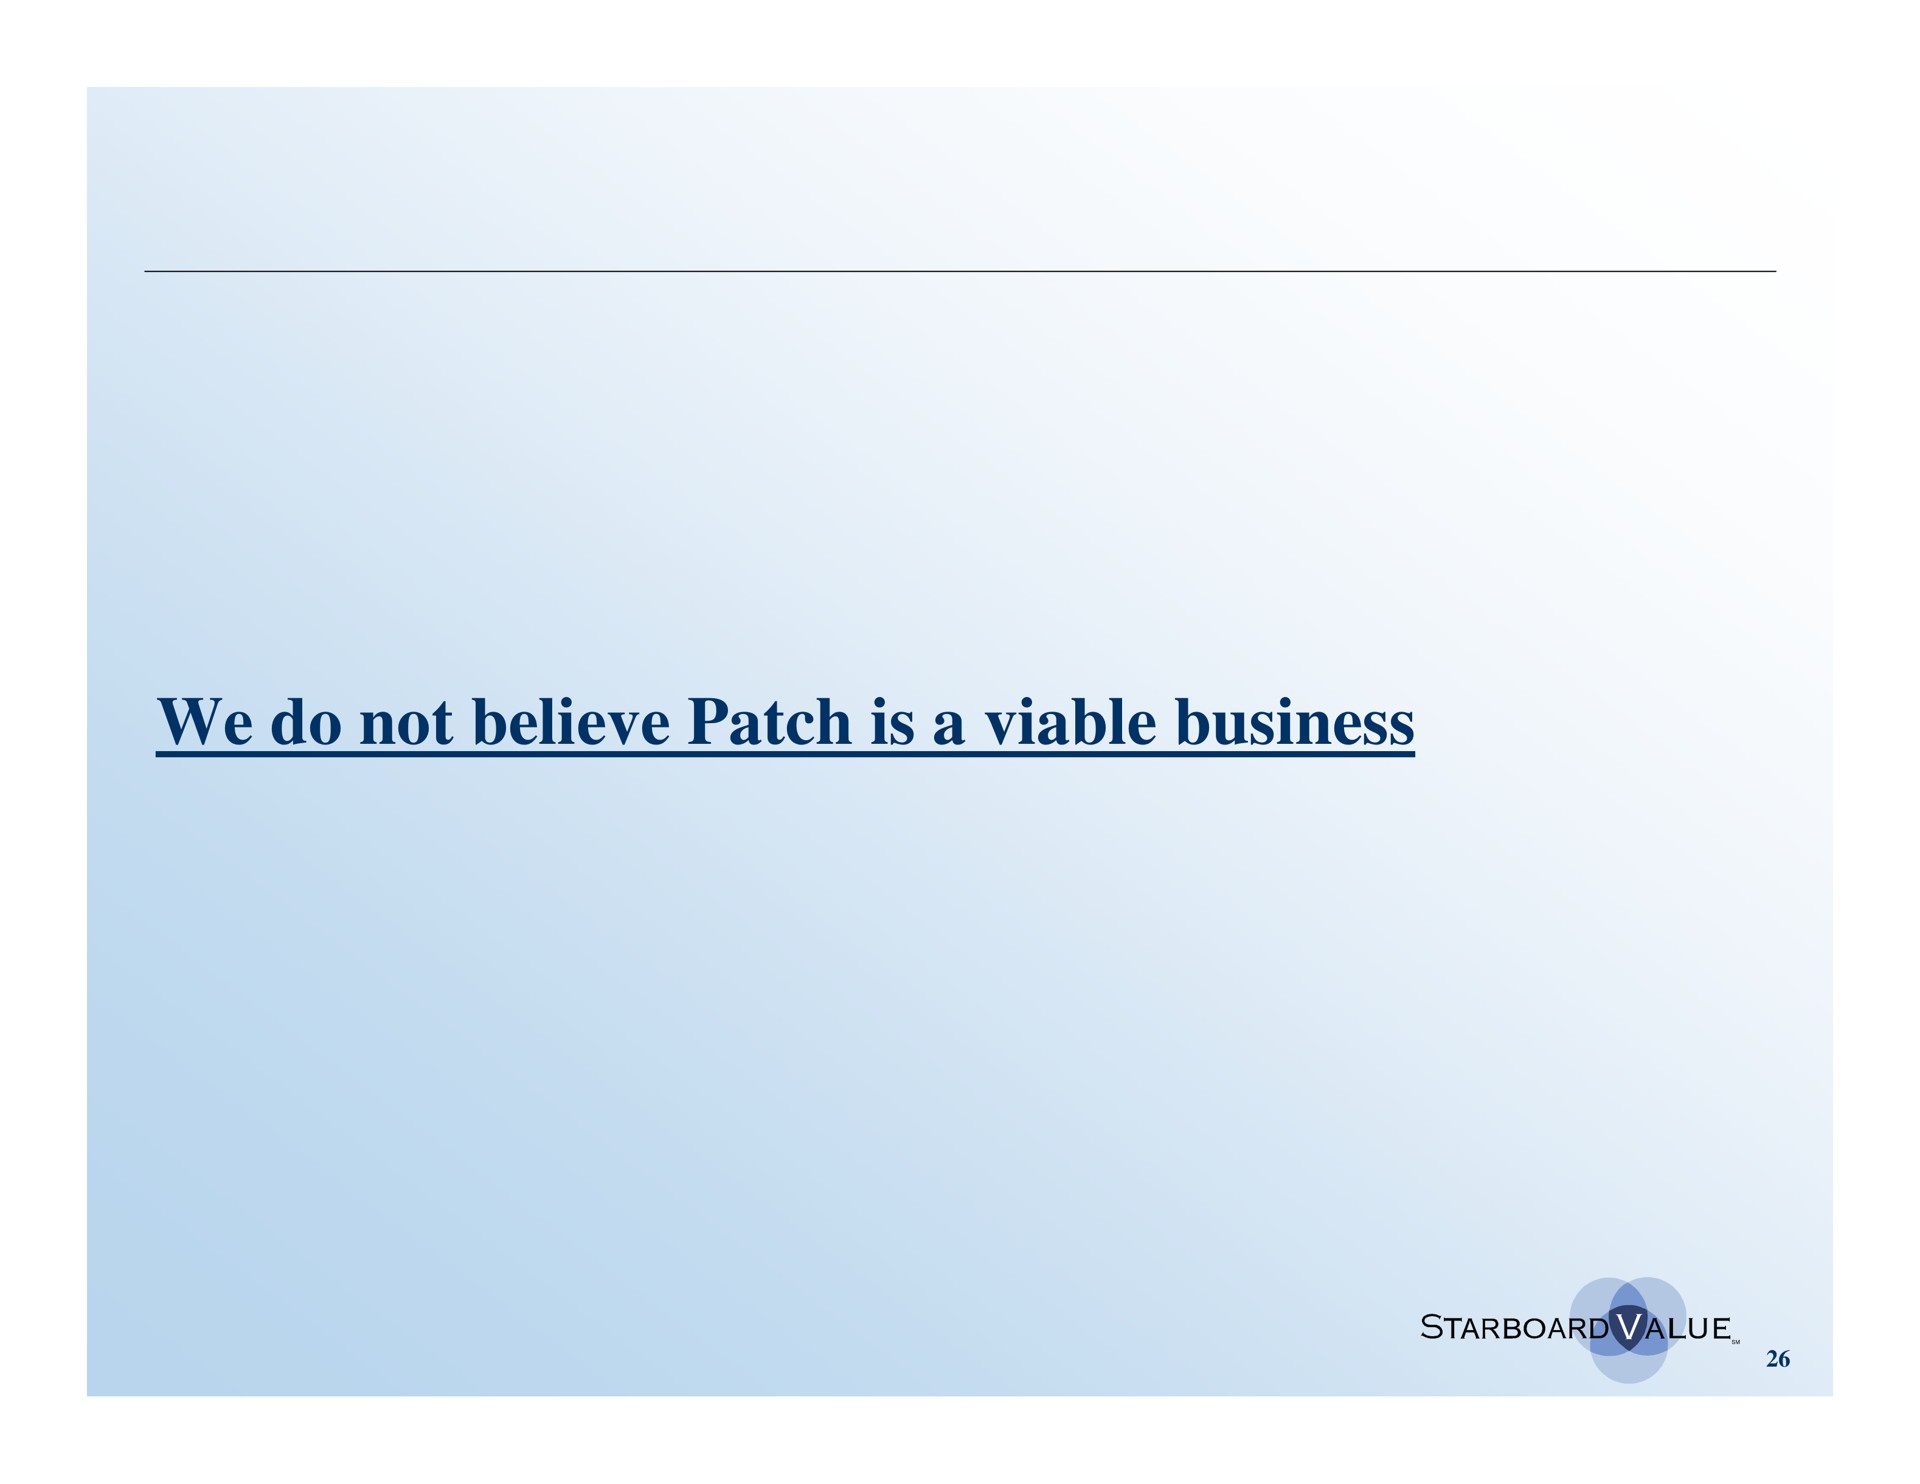 we do not believe patch is a viable business | Starboard Value